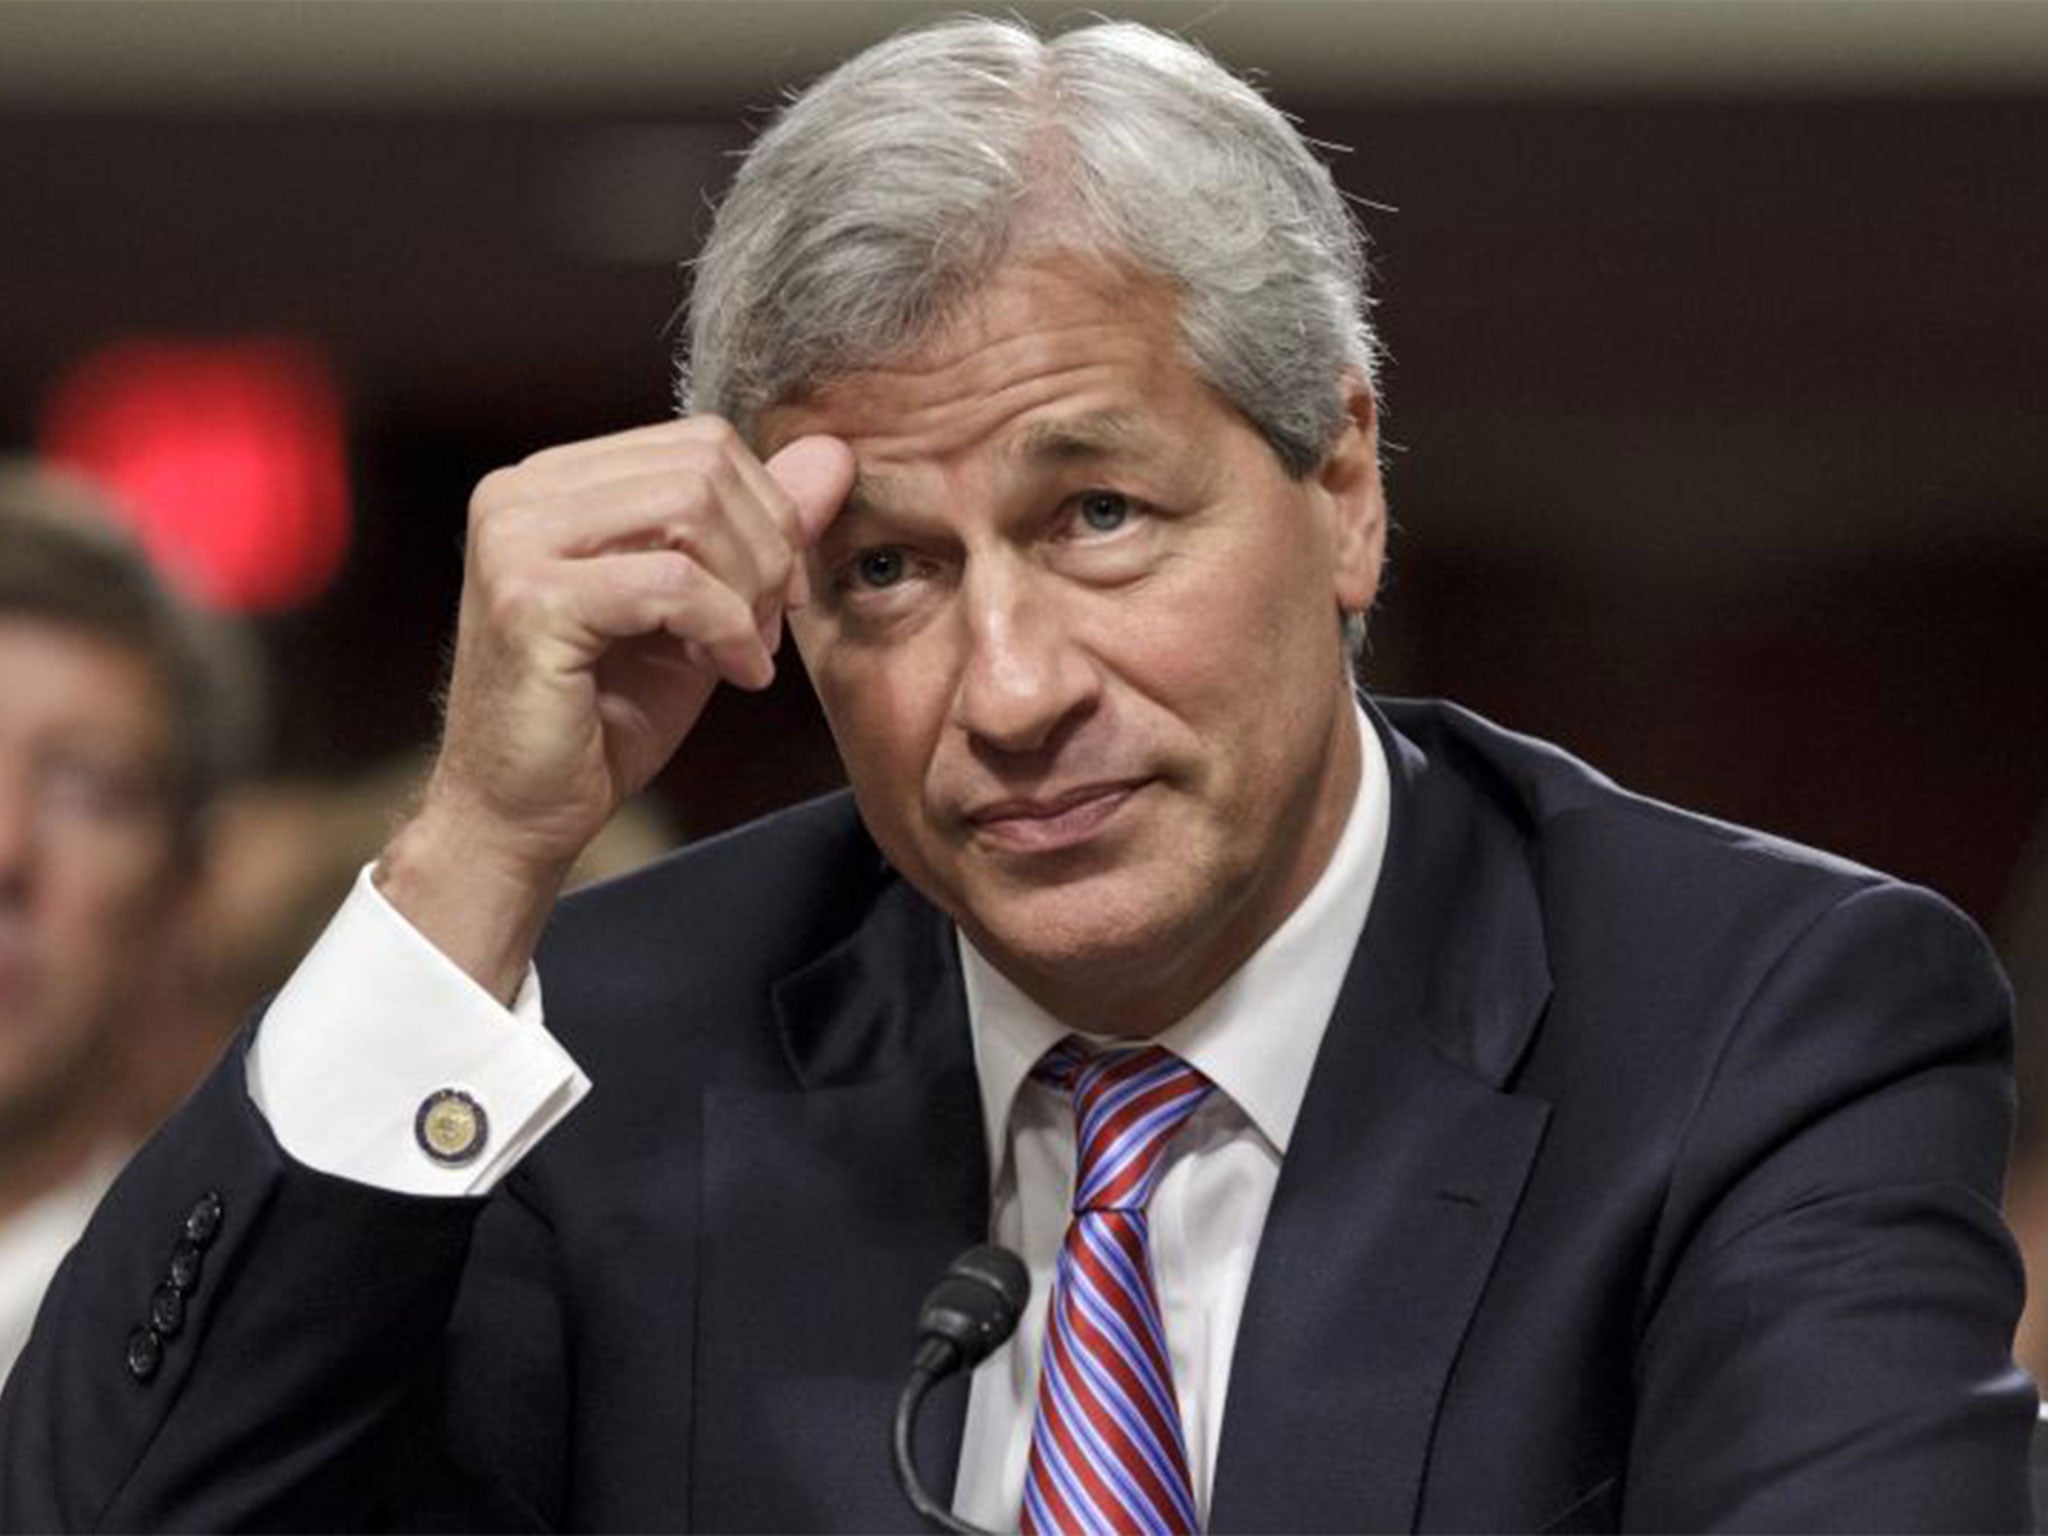 Jamie Dimon, the outspoken CEO of JP Morgan, held Downing Street talks with Theresa May